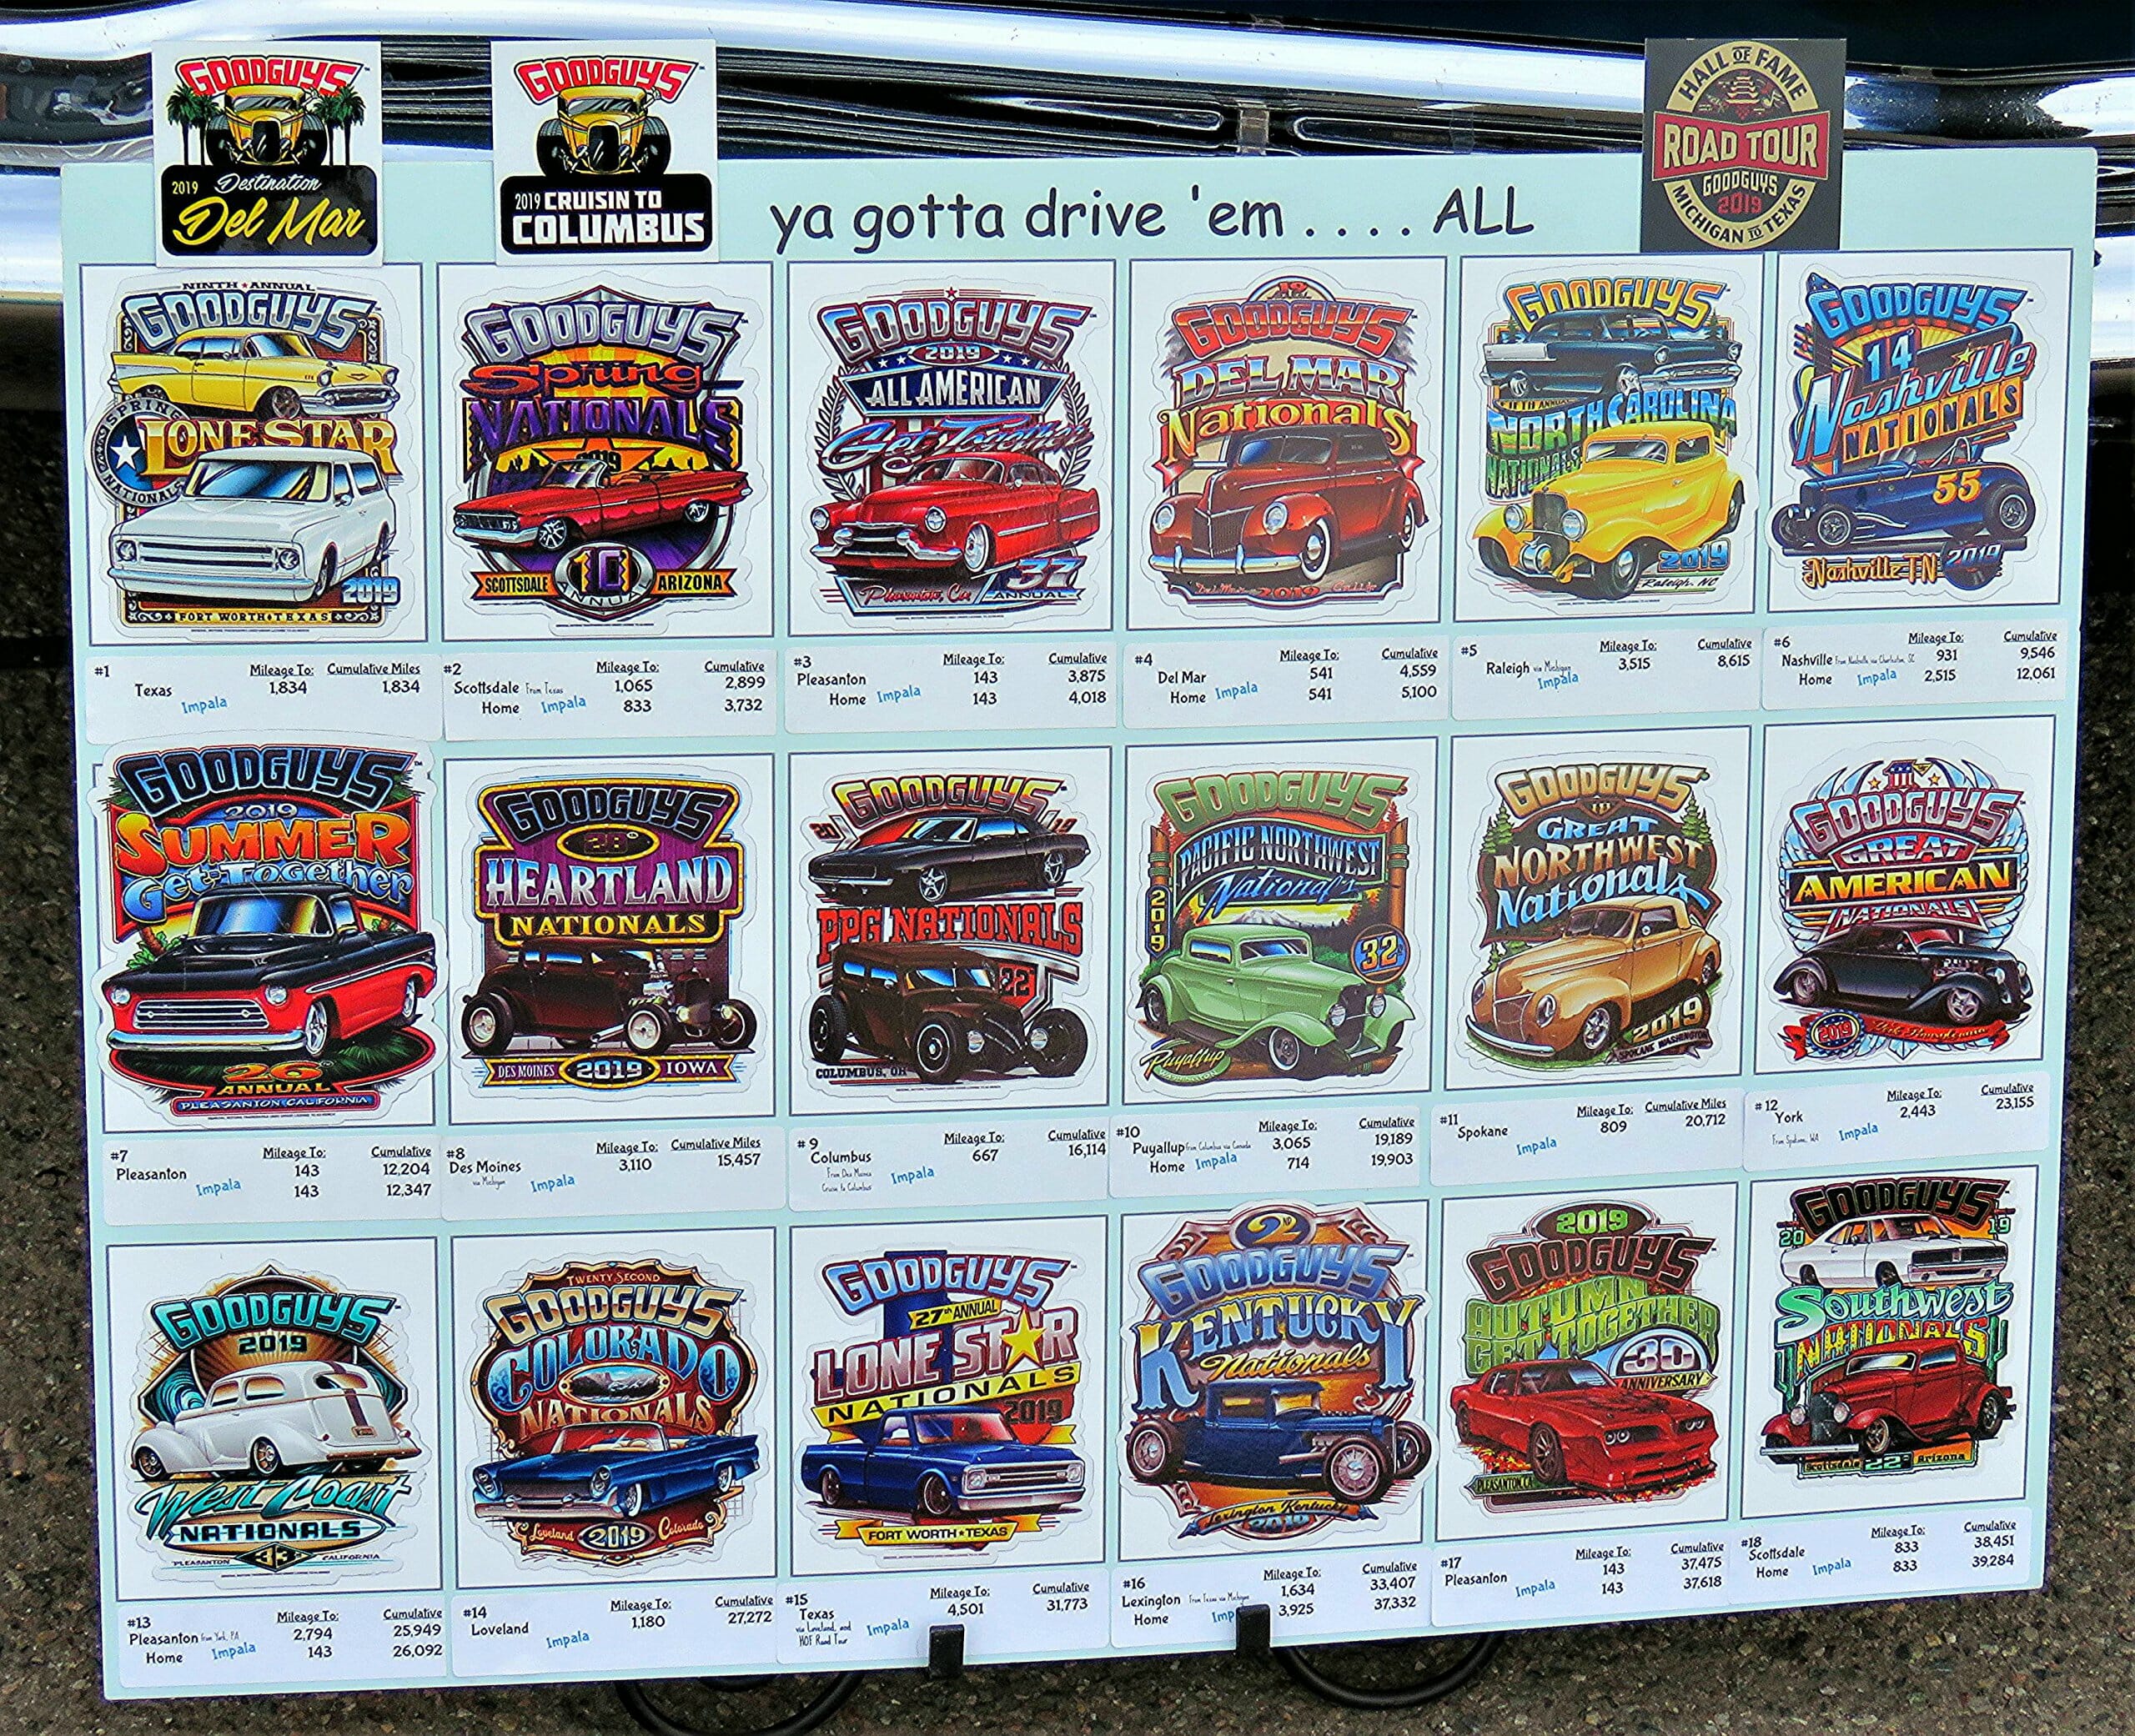 goodguys, All 18 Goodguys shows in one season, and 40,000 miles in a ’61 Chevy Impala, ClassicCars.com Journal